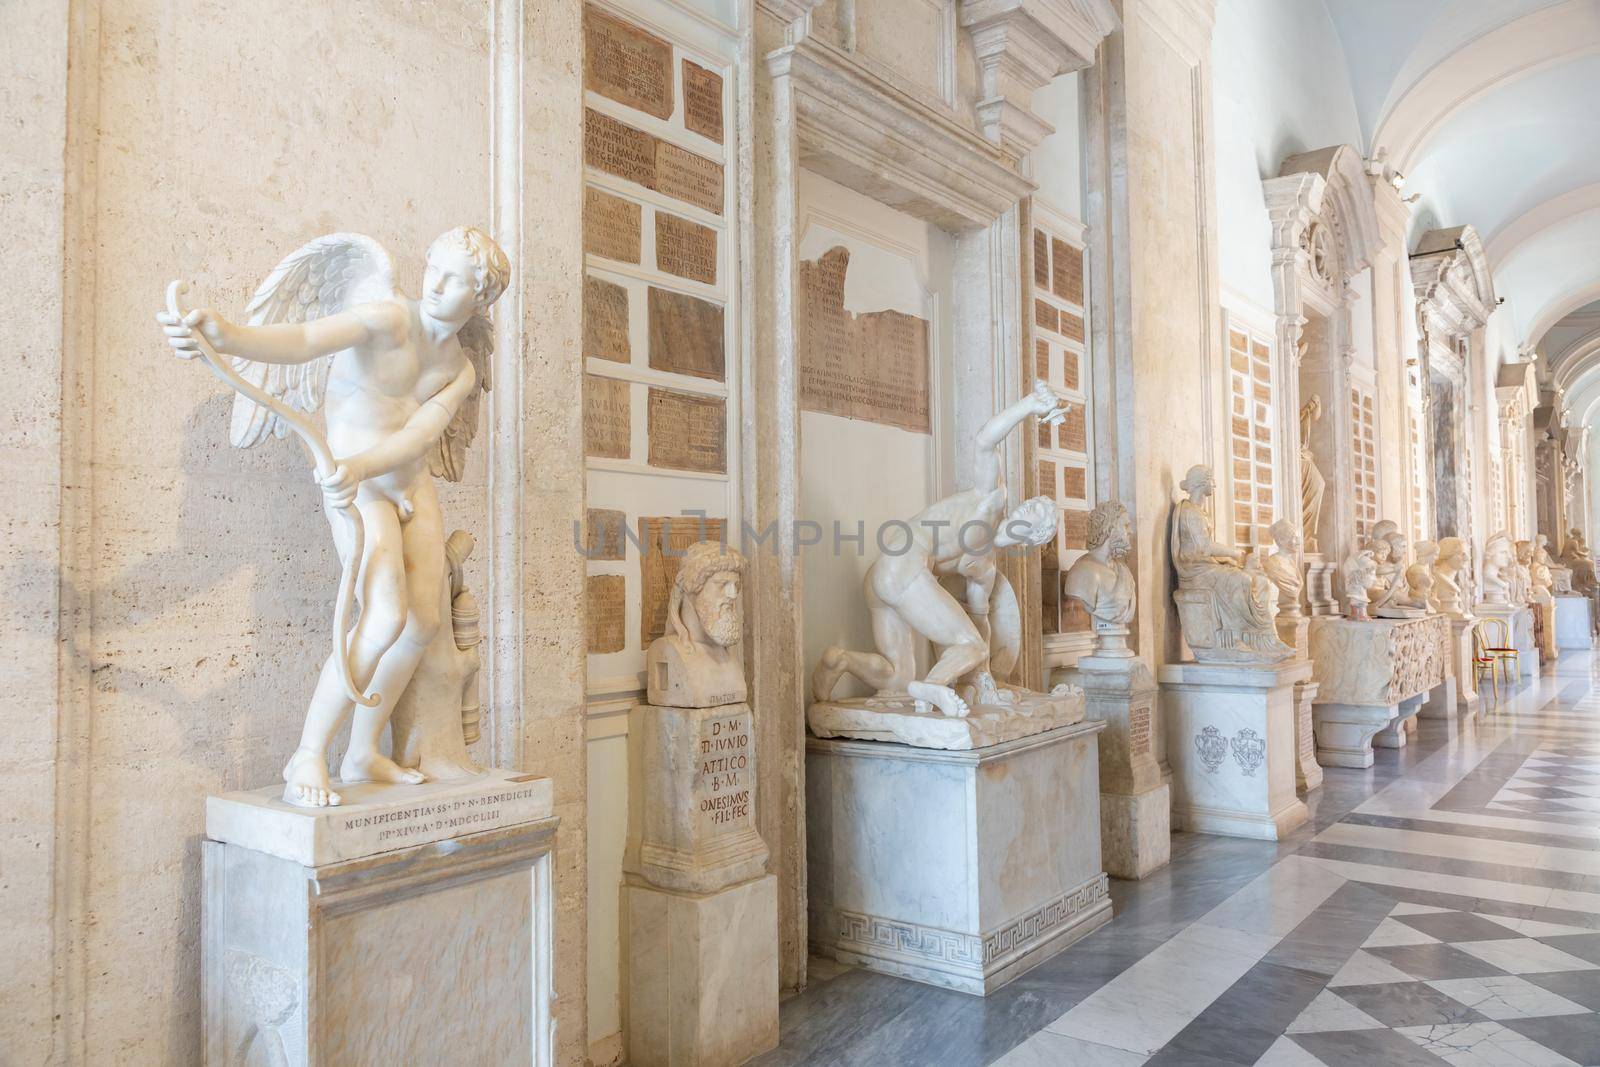 Vatican museum interior collection perspective by Perseomedusa